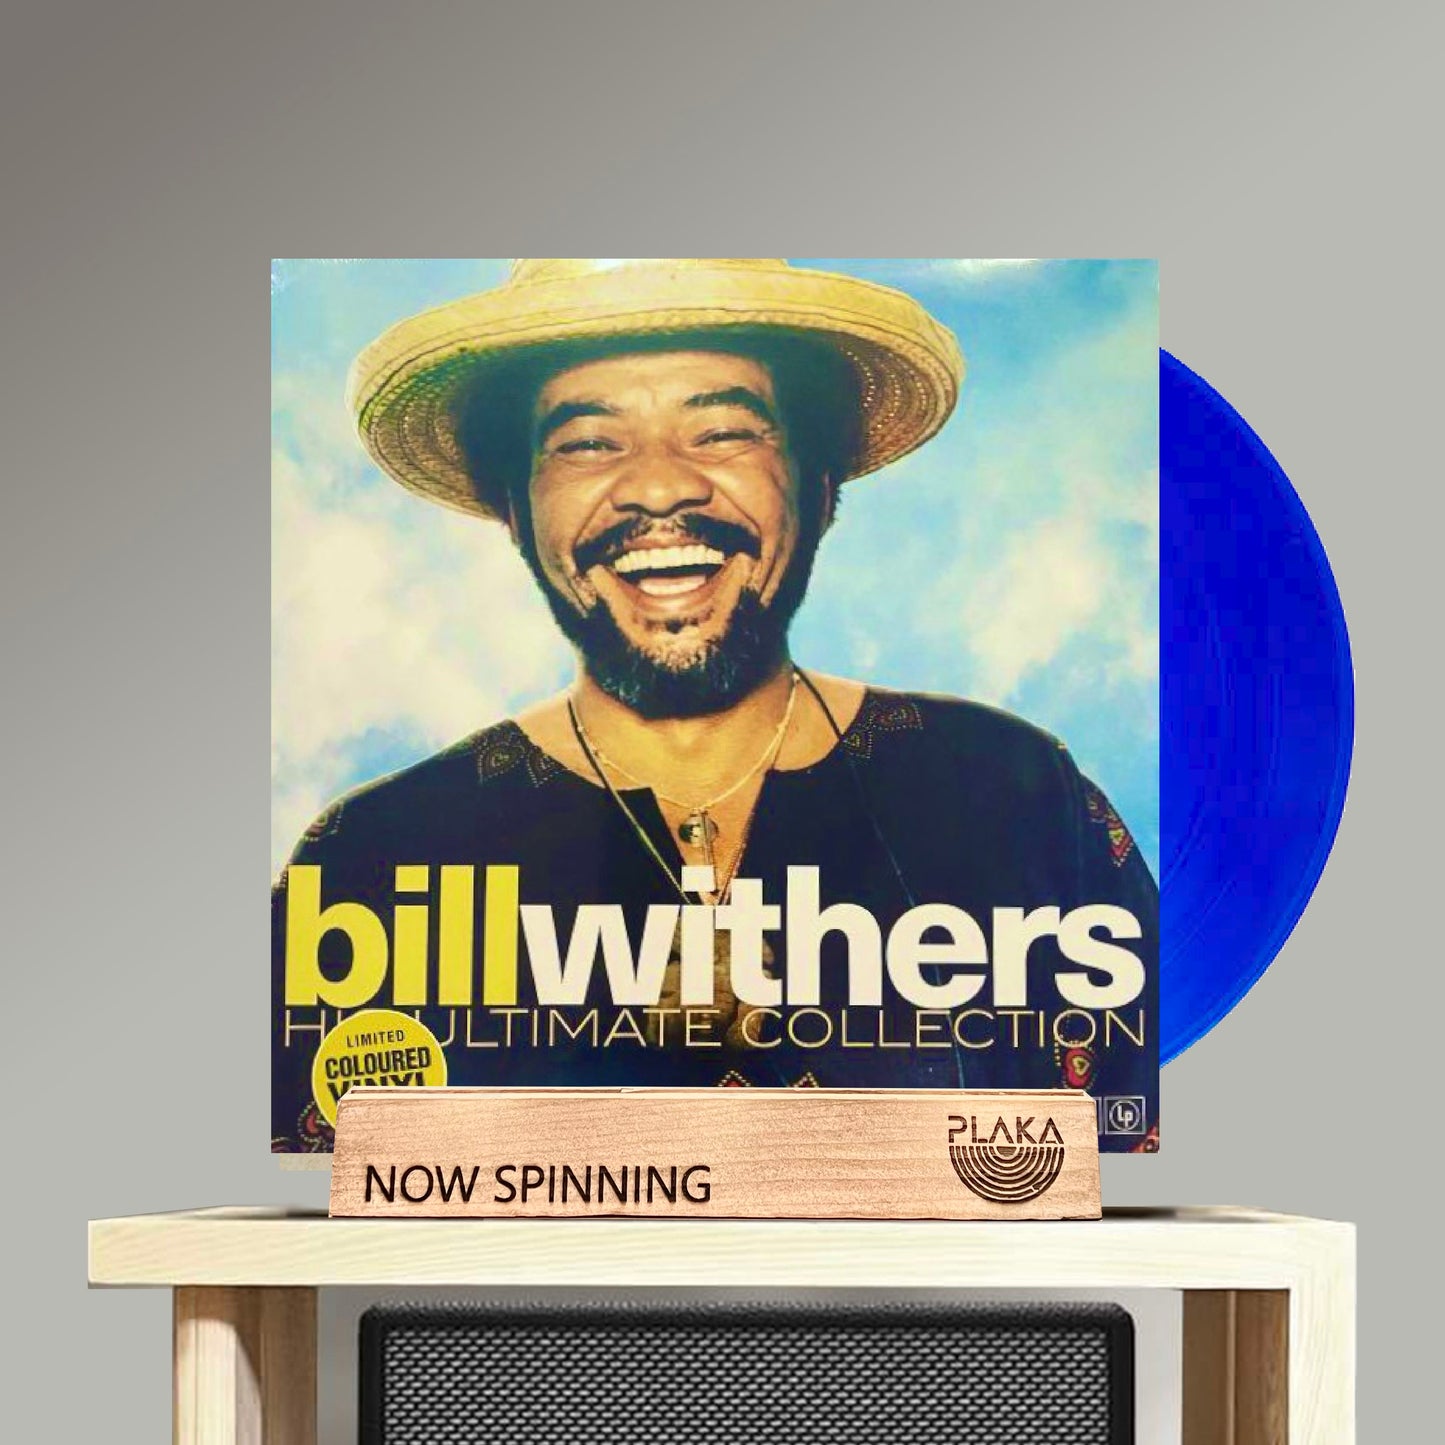 Bill Withers - His Ultimate Collection